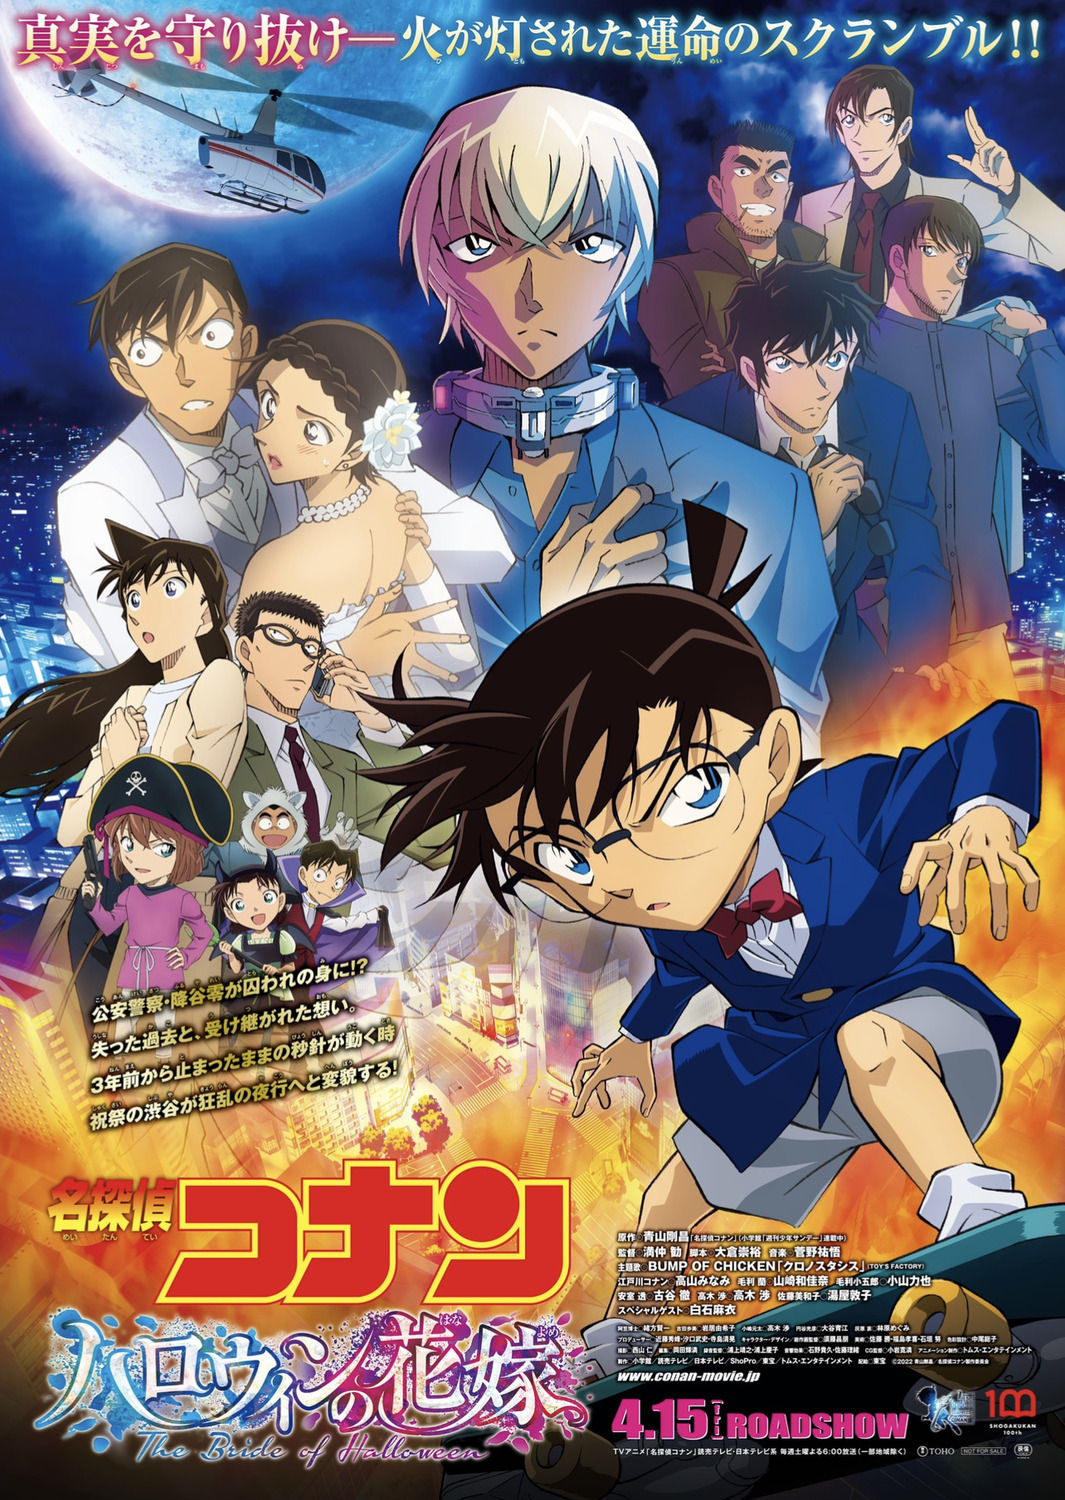 Extra Large Movie Poster Image for Detective Conan: The Bride of Halloween 